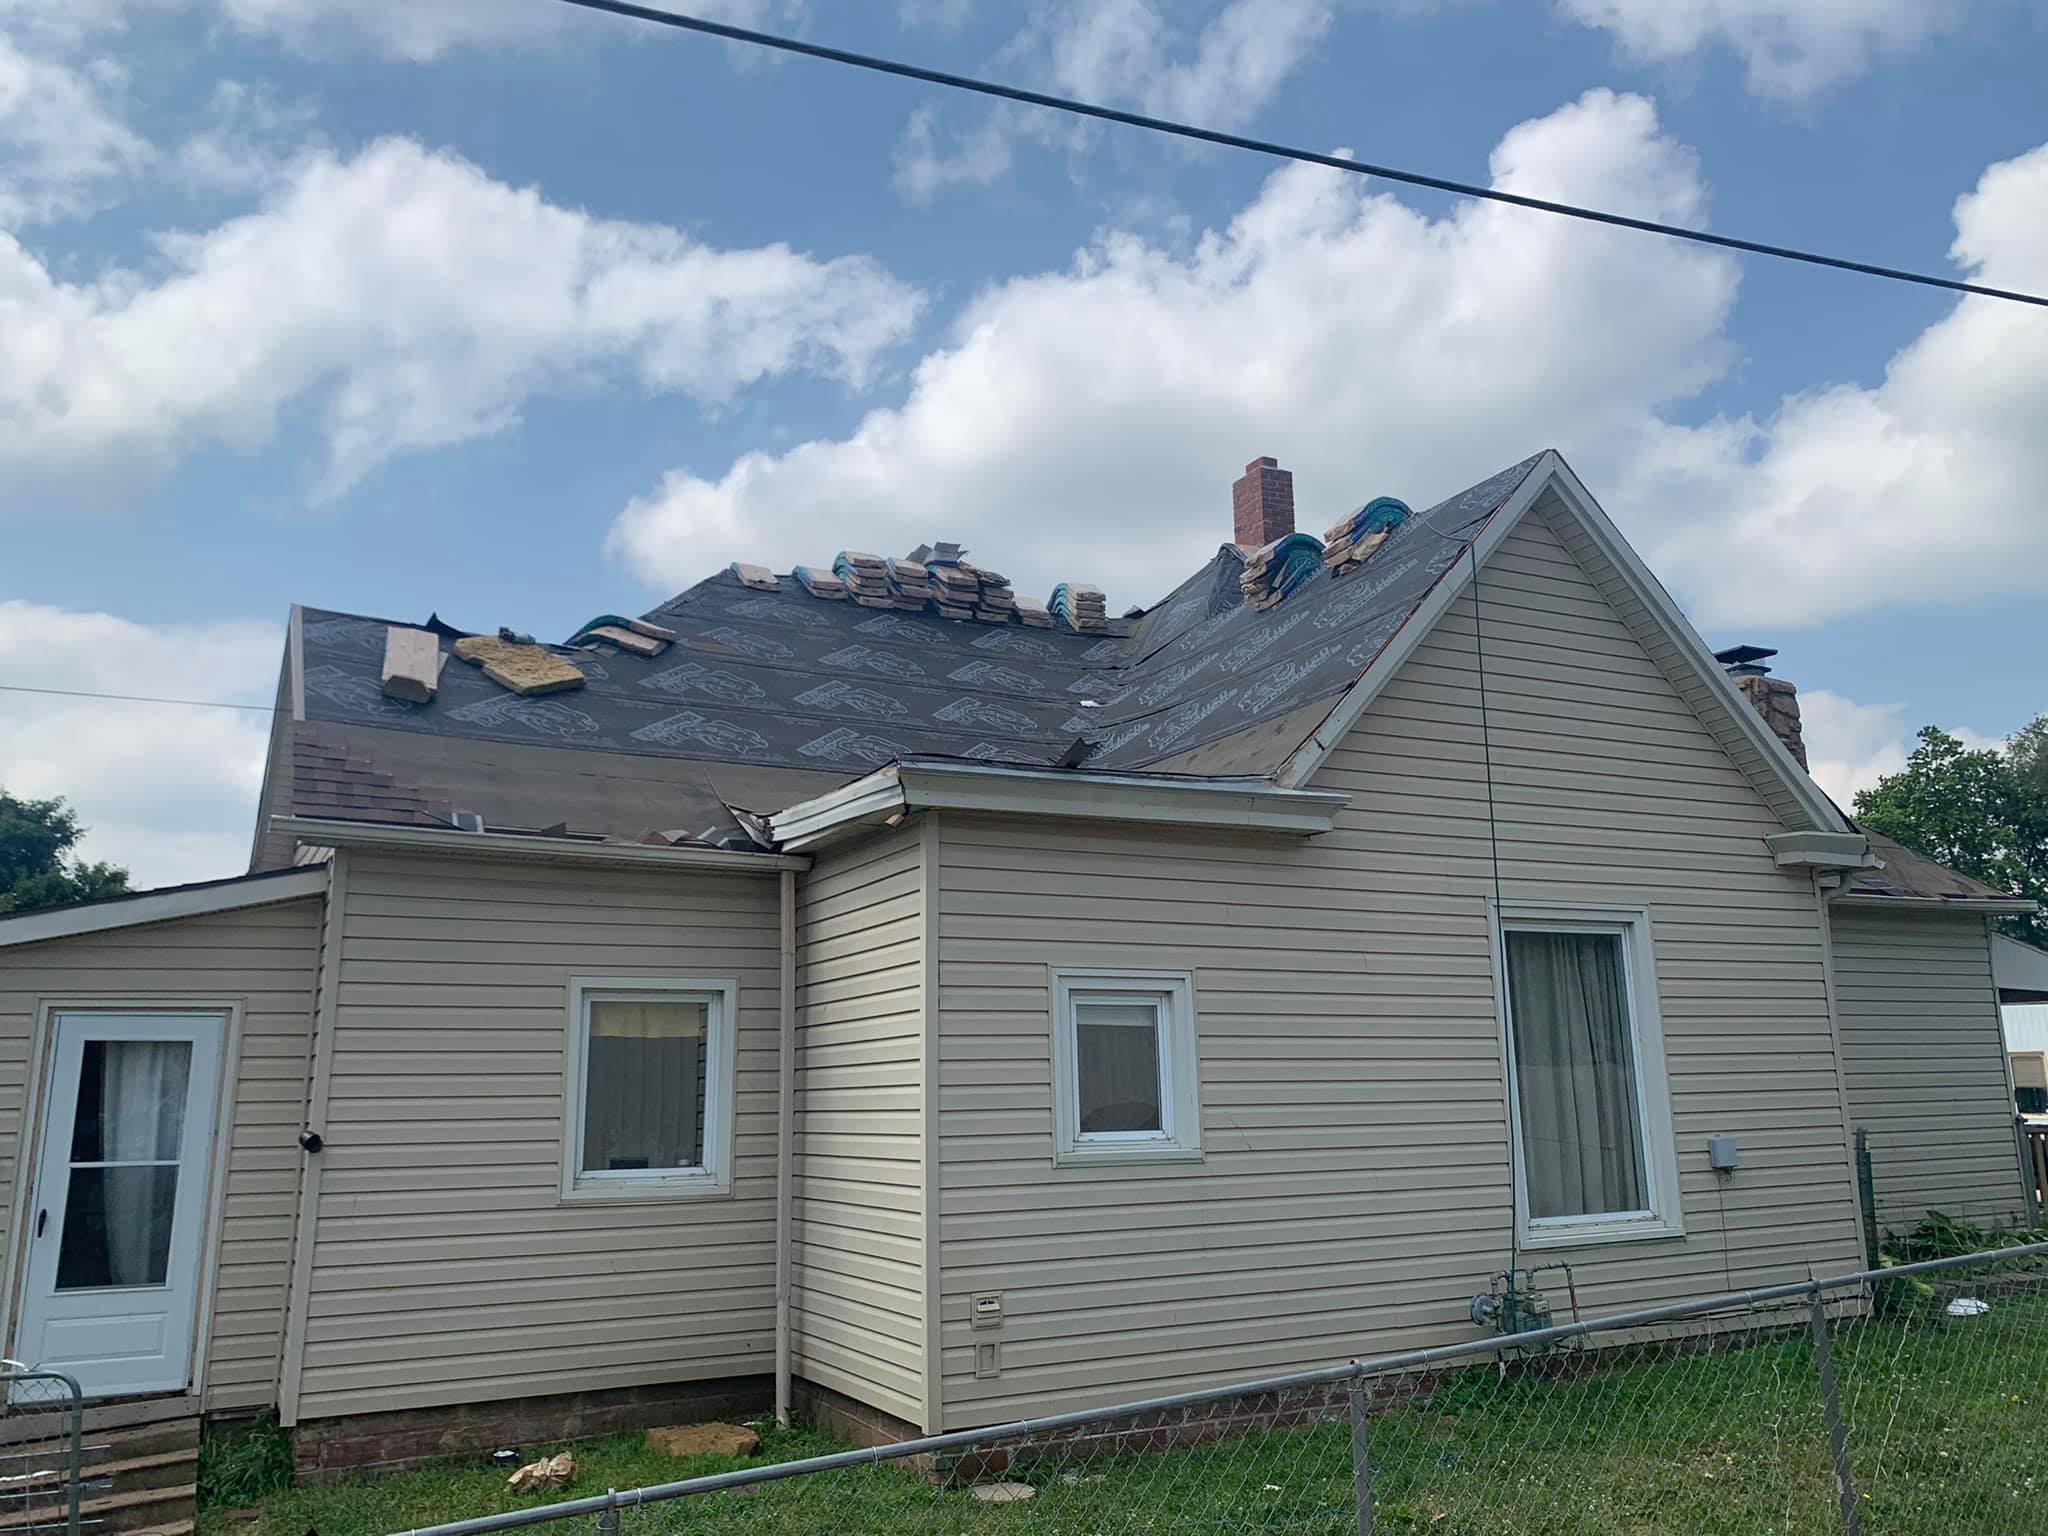 Roofing Companies Near Parkville Missouri - How To Find A Professional Good Company